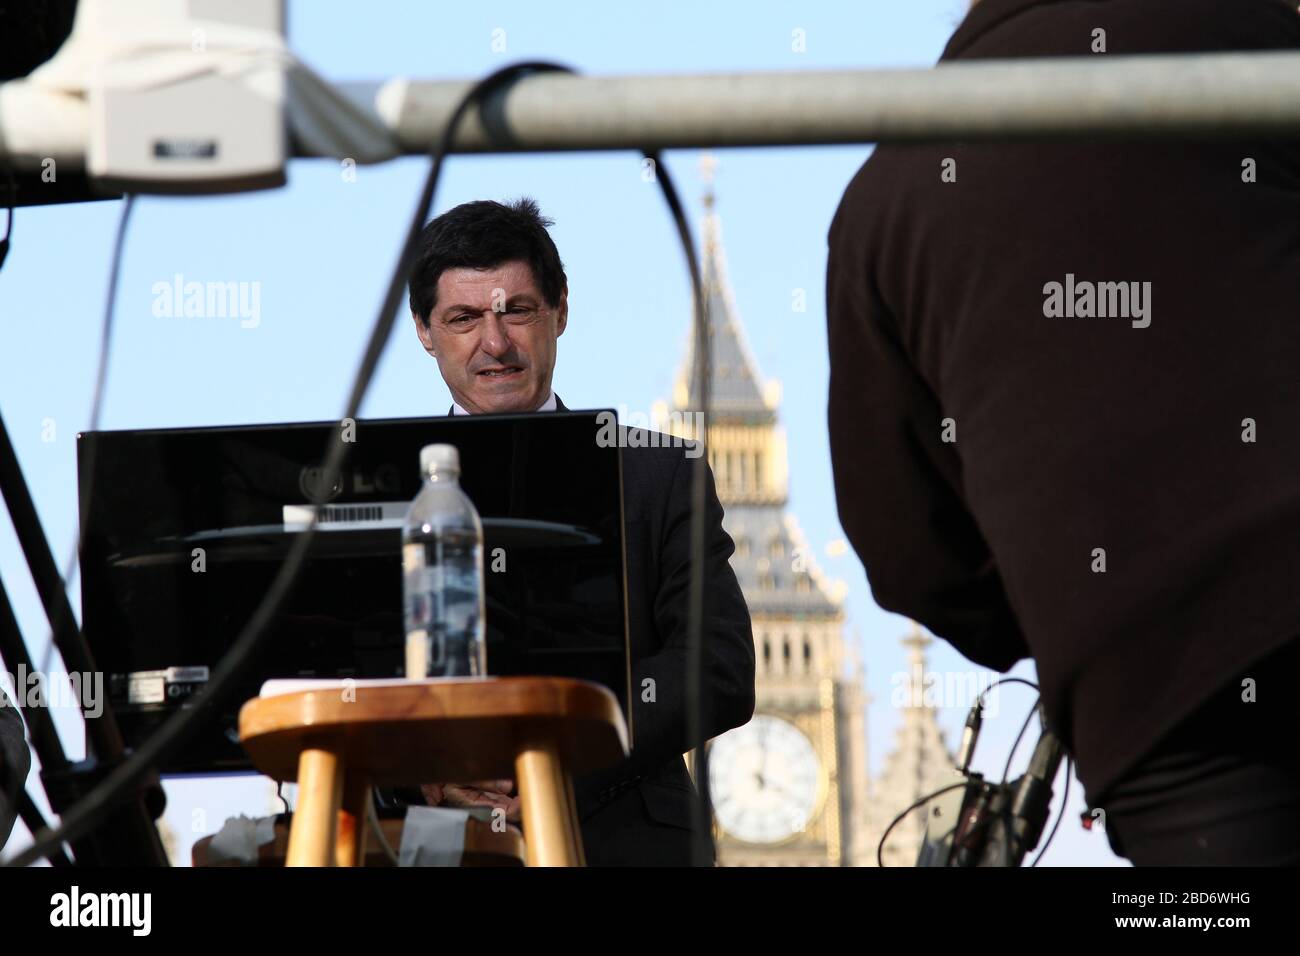 NORTH AMERICA POLITICAL EDITOR JON SOPEL GETTING PREPARED FOR BRORDCASTING THE BBC NEWS. NTERNATIONAL NEWS CHANELL BBC WORLD NEWS. HARDTALK. THE POLITICS SHOW. AROUND WESTMINSTER. PICTURED IN WESTMINSTER , LONDON, UK ON 21ST MARCH 2012. Stock Photo